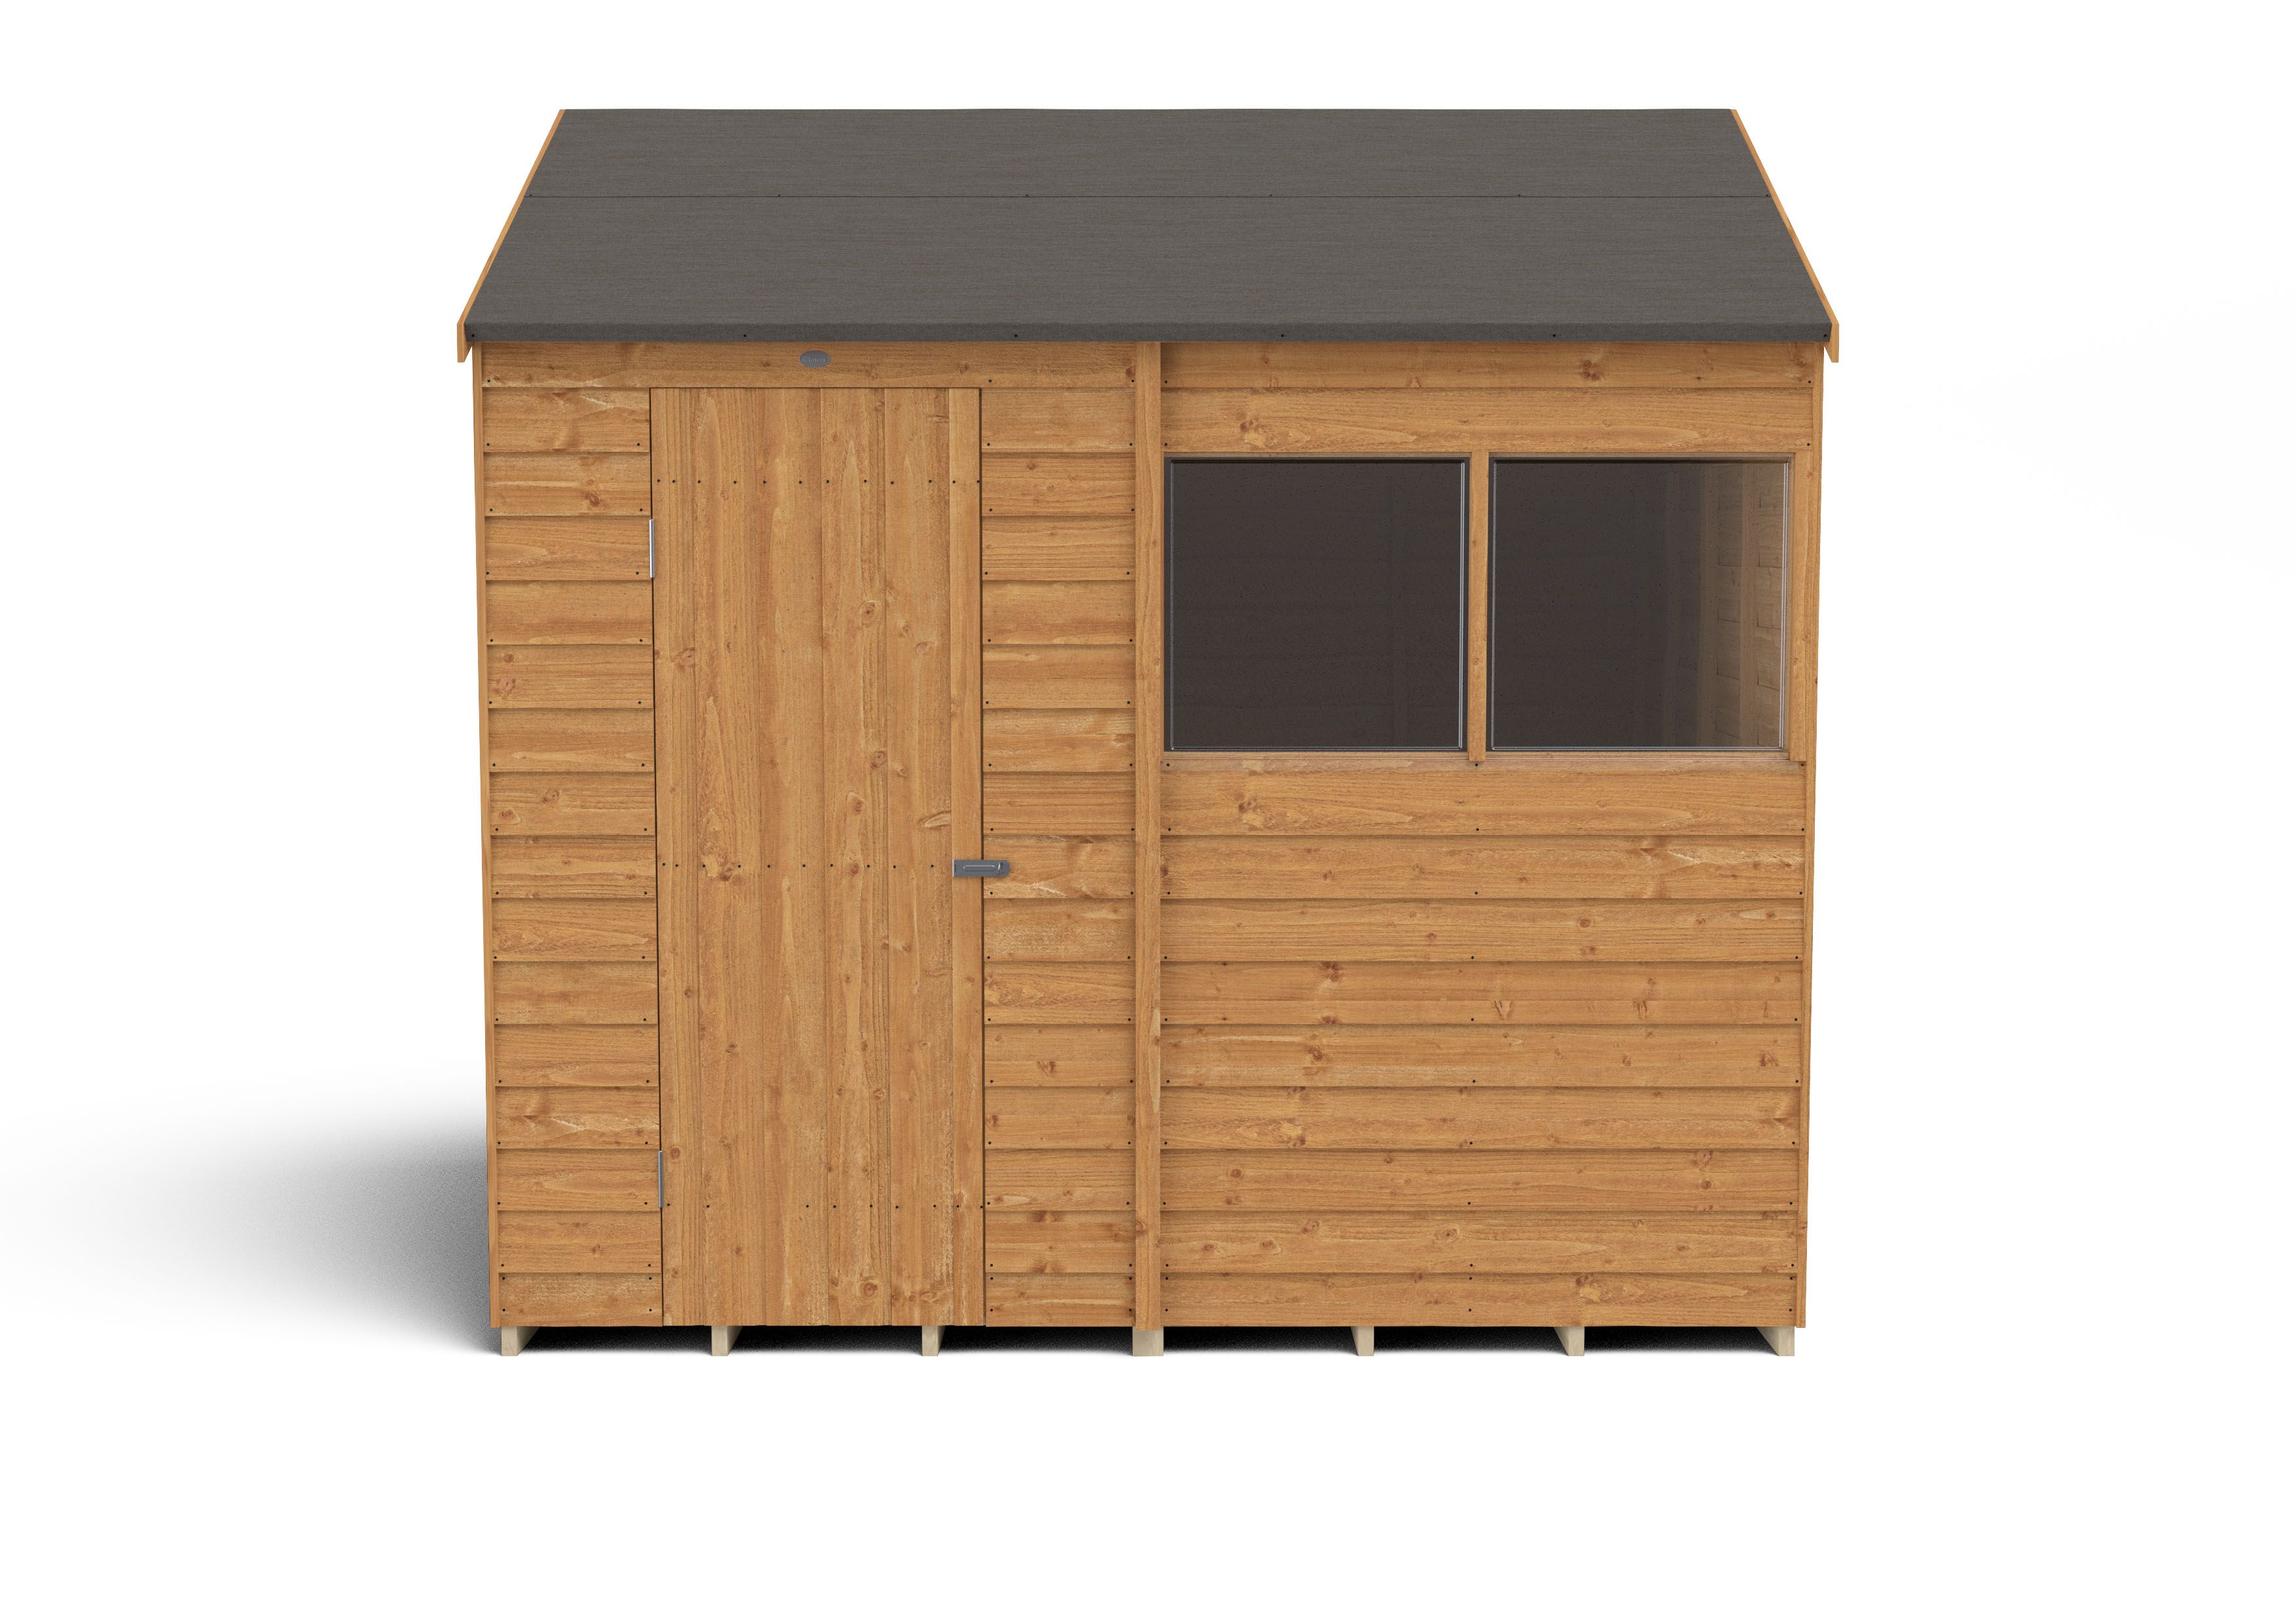 Forest Garden Overlap 8x6 ft Reverse apex Wooden Dip treated Shed with floor & 2 windows (Base included)